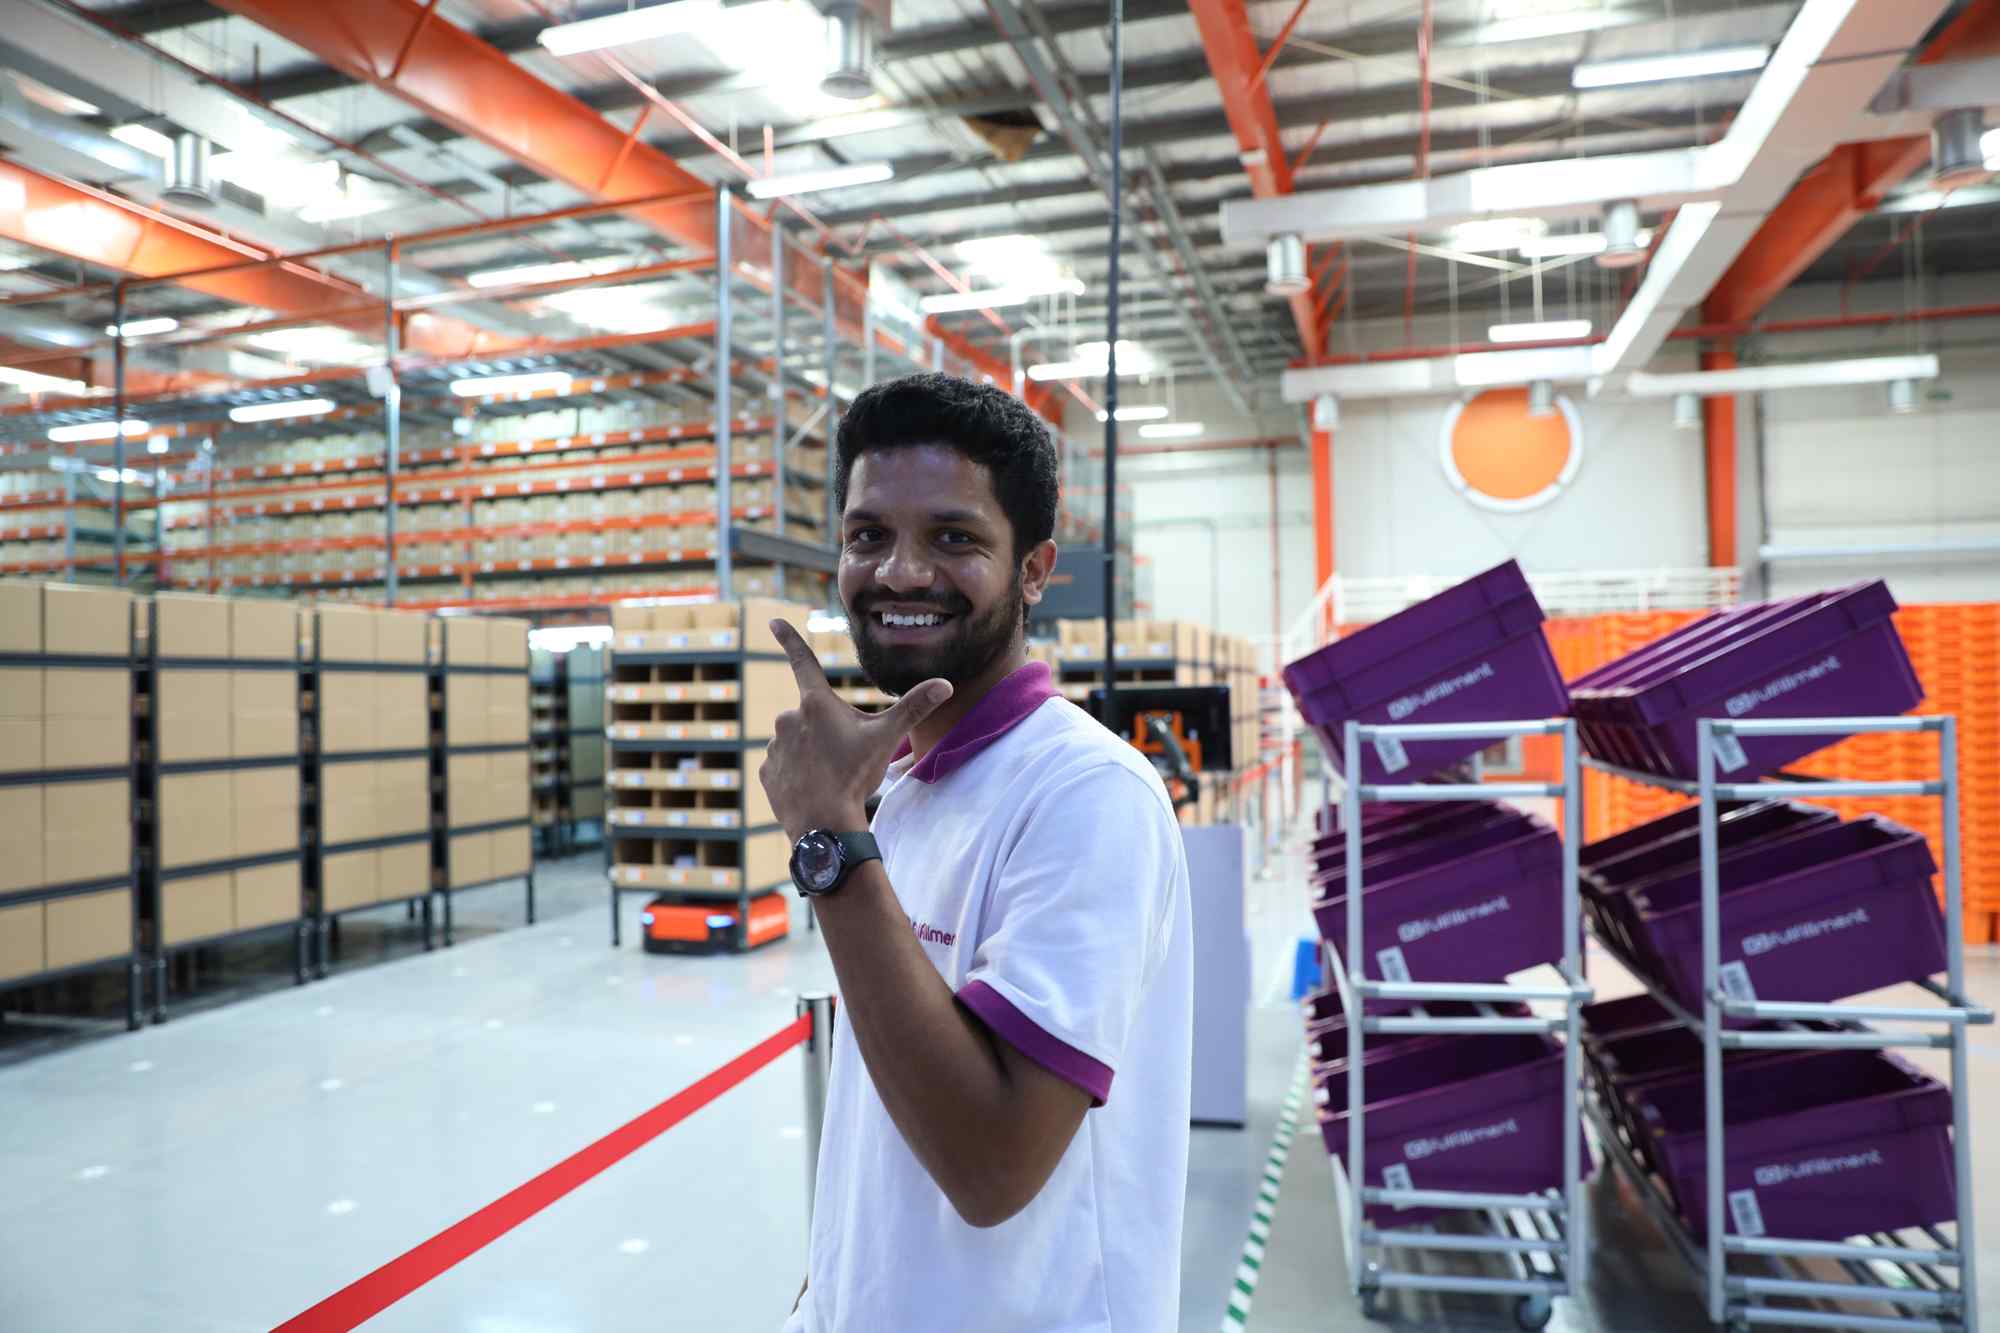 How do you process 27,000 warehouse orders a day with just 40 people?